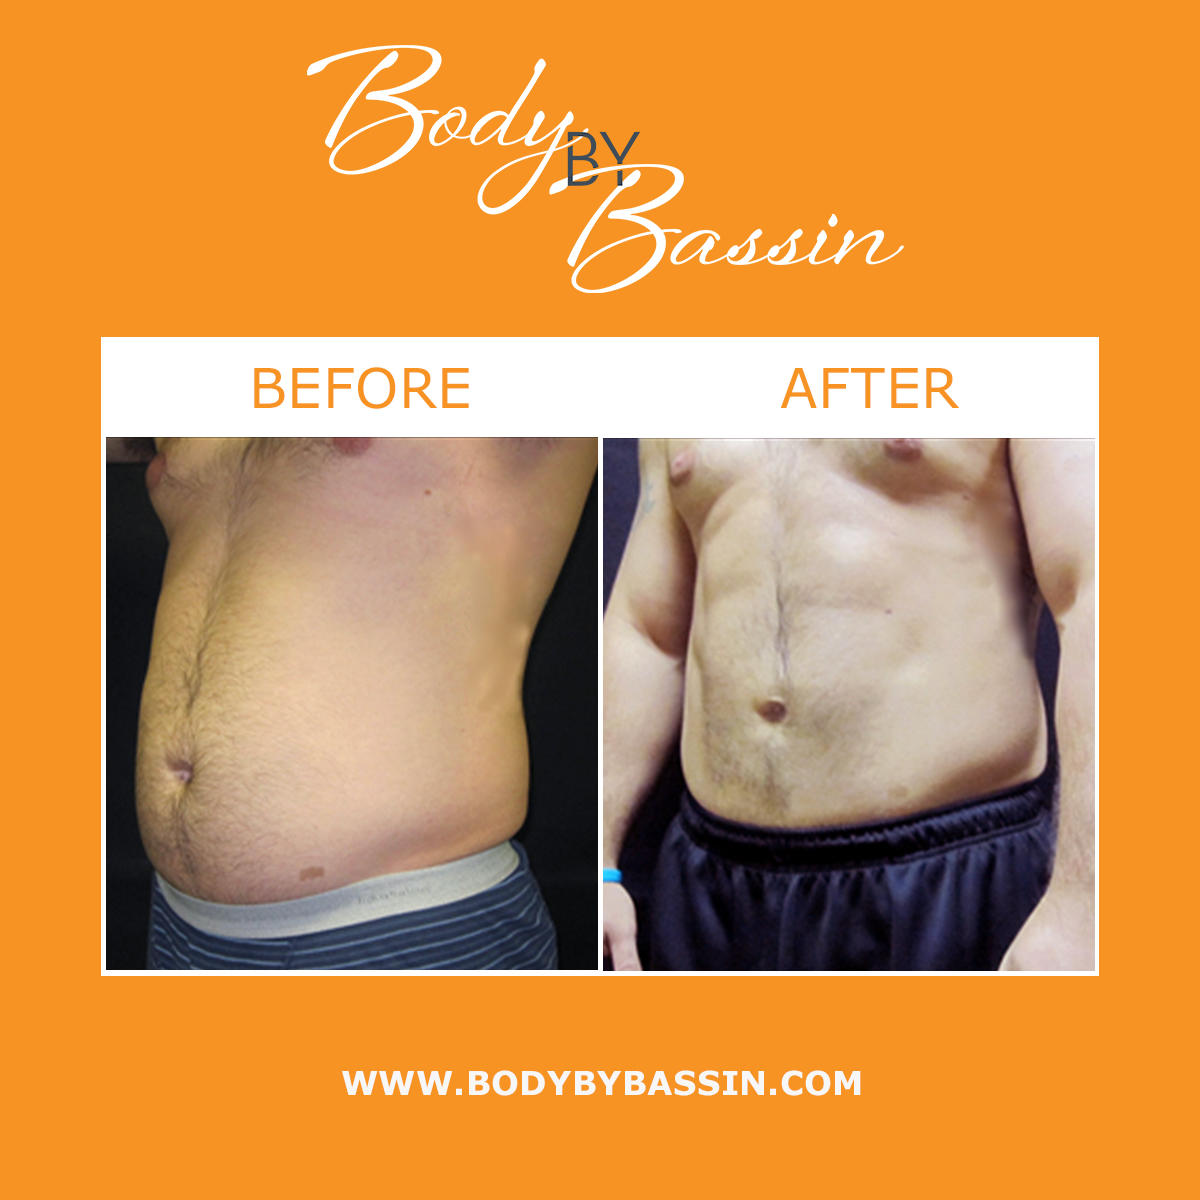 Male liposuction in Orlando can remove excess fat from the abdomen for a more sculpted physique. Lipo for men can provide long-lasting, natural-looking definition to the abdomen by targeting stubborn fat deposits that are often resistant to diet and exercise.